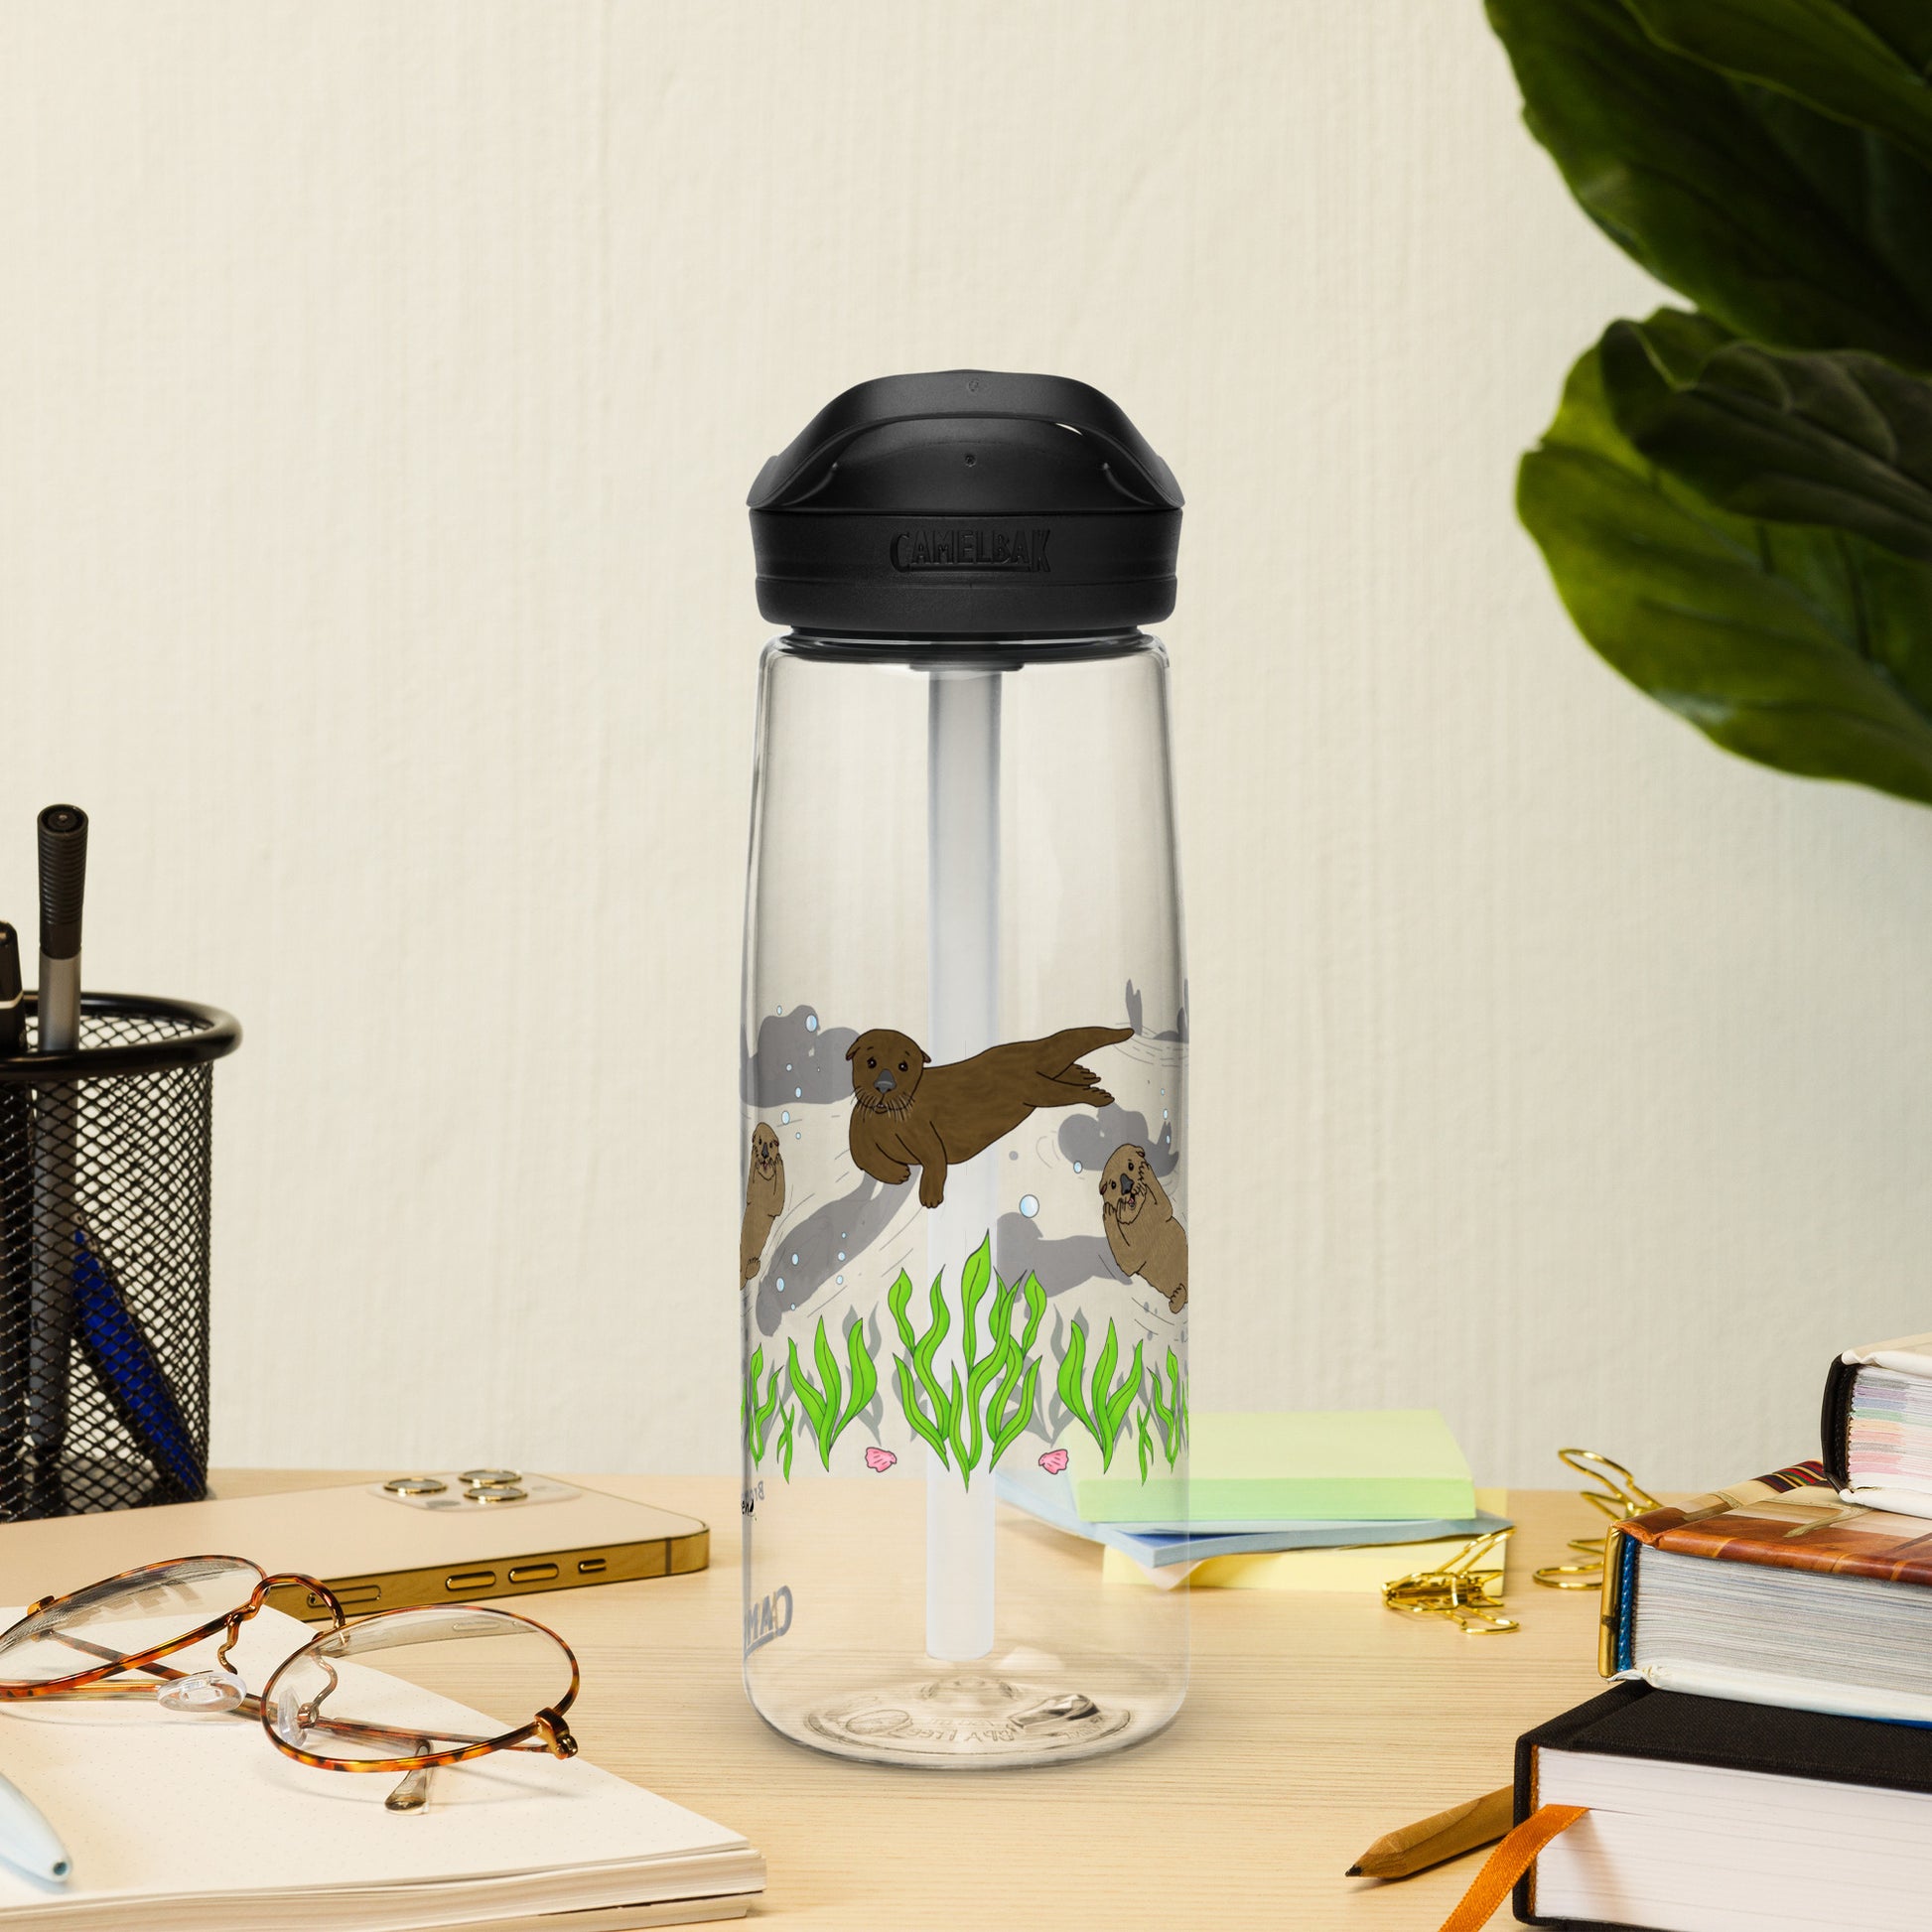 25 ounce sports water bottle with spill proof lid and bite valve. Clear stain and odor-resistant BPA-free plastic with sea otter designs around the bottle, swimming above the seaweed and shells. Shown on tabletop by books, pen holder, and glasses.